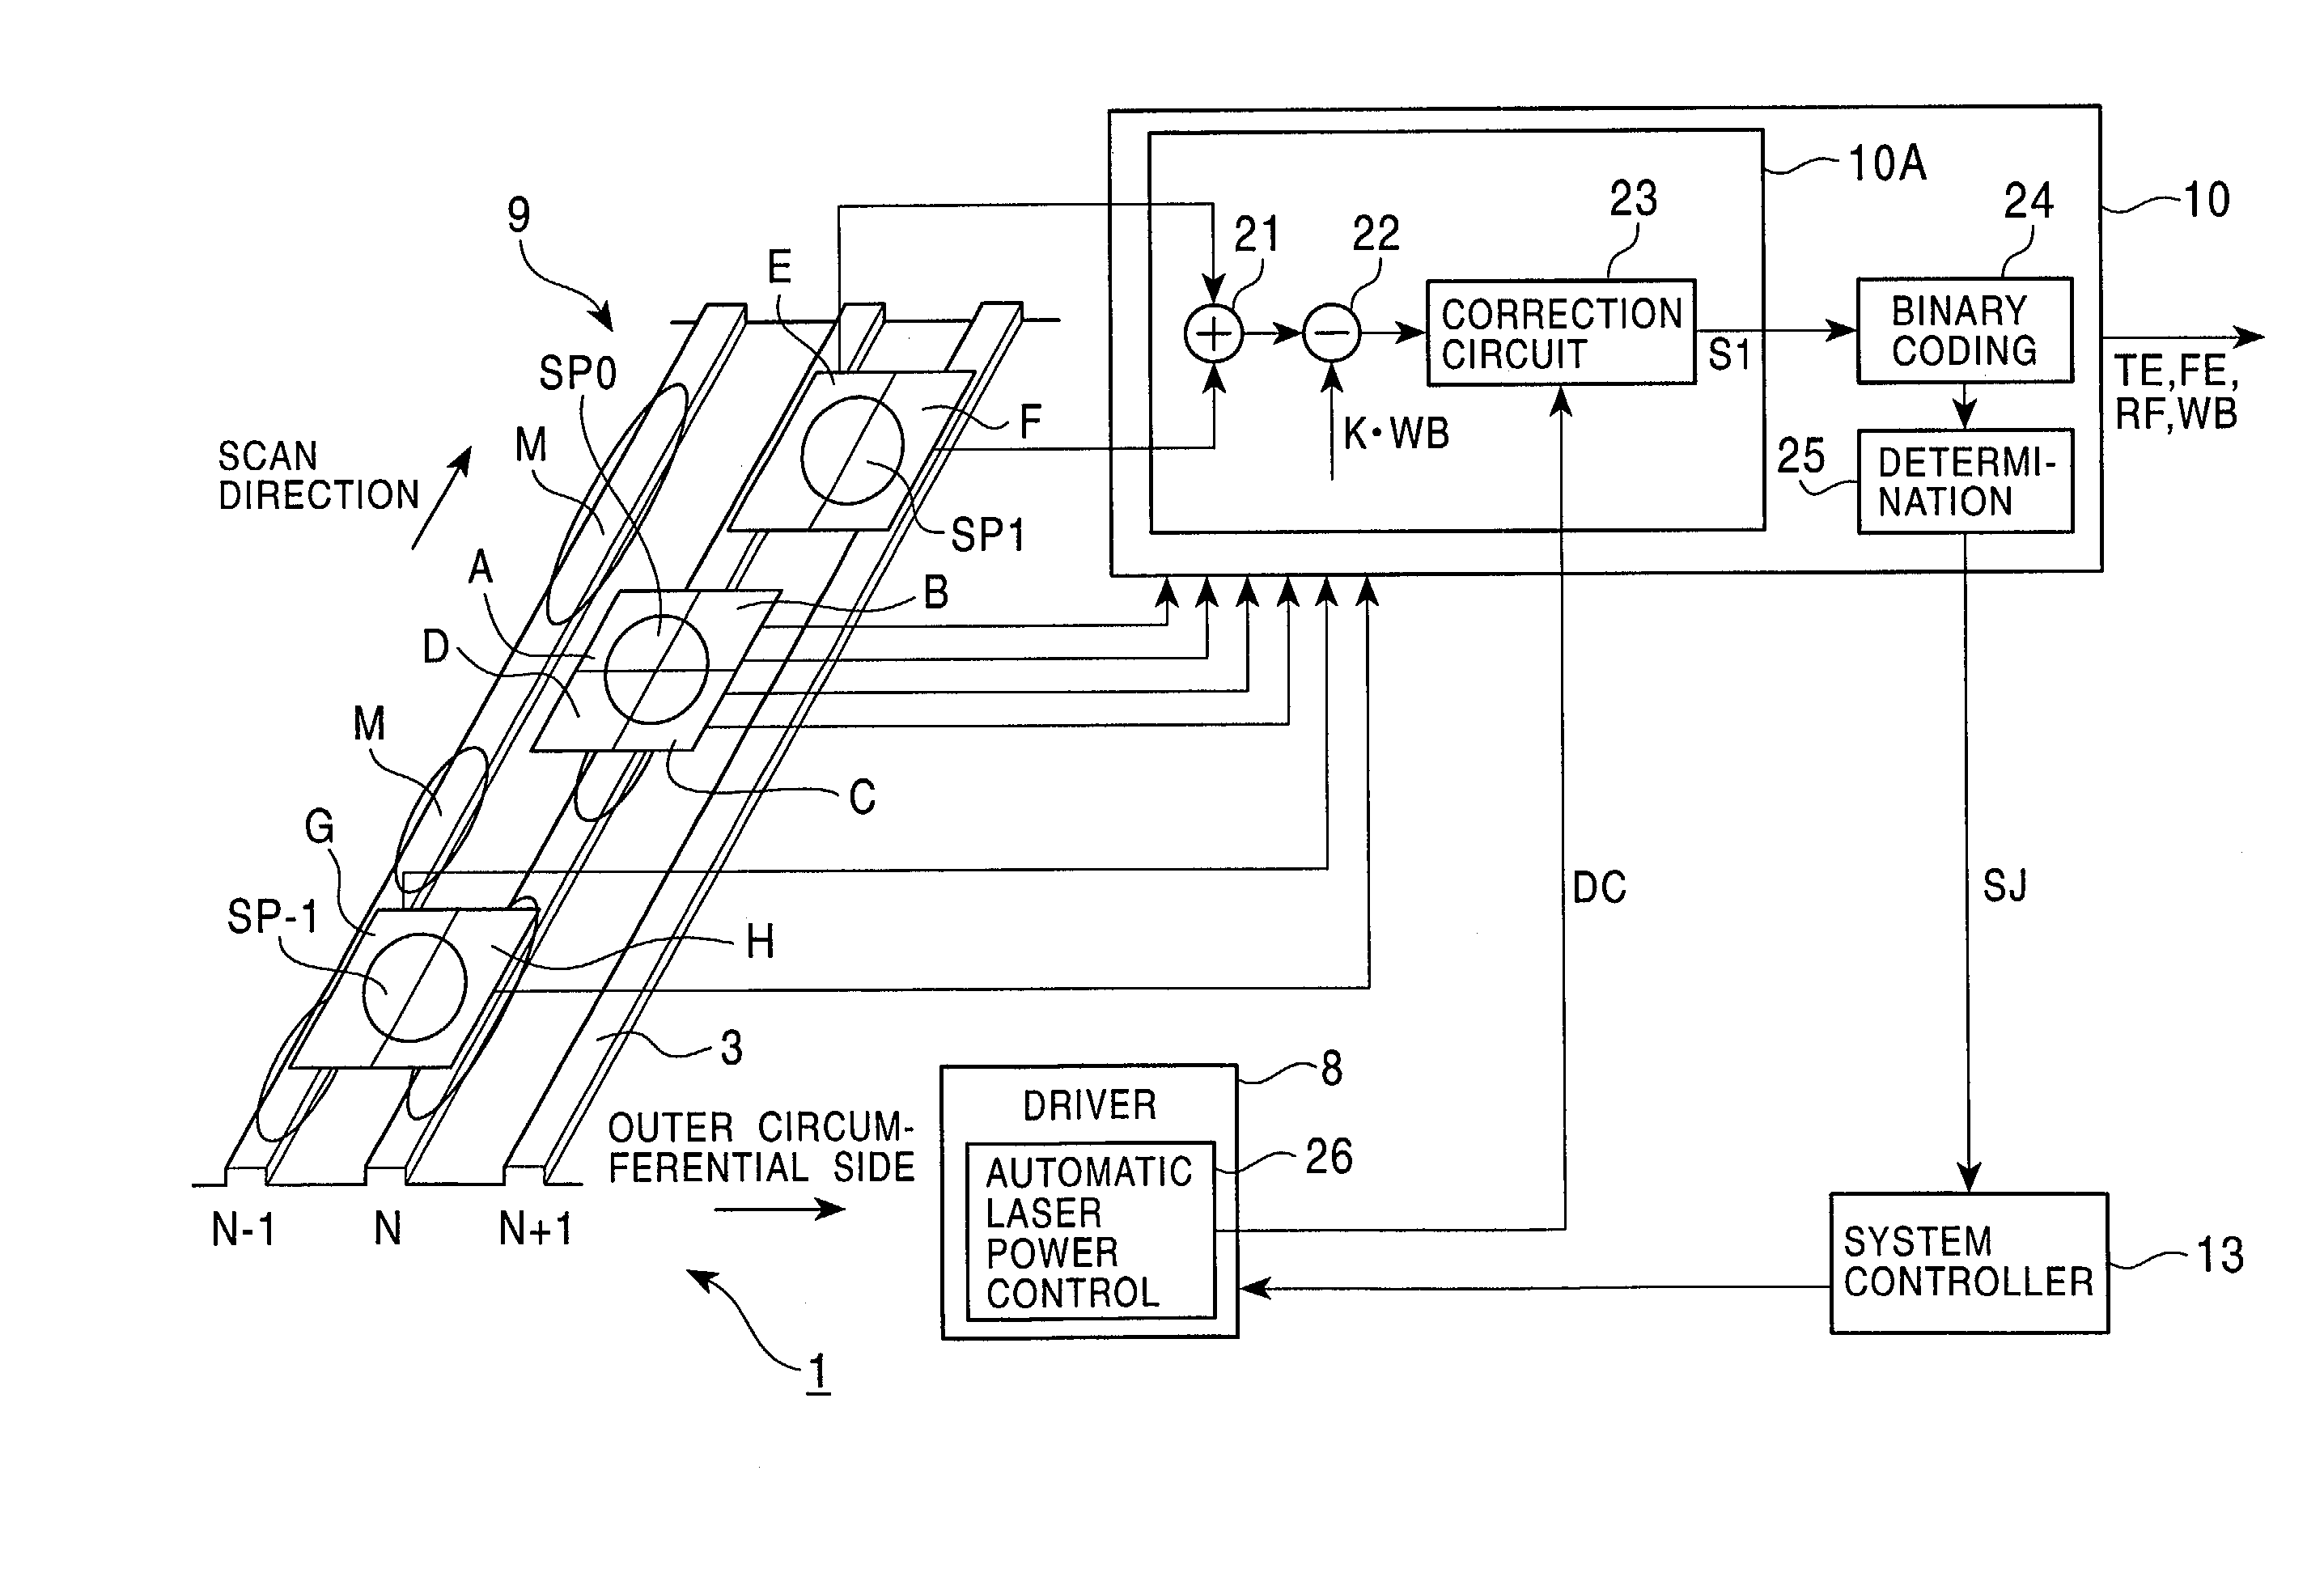 Optical disc device and control method using preceding sub-beam to detect a disc defect